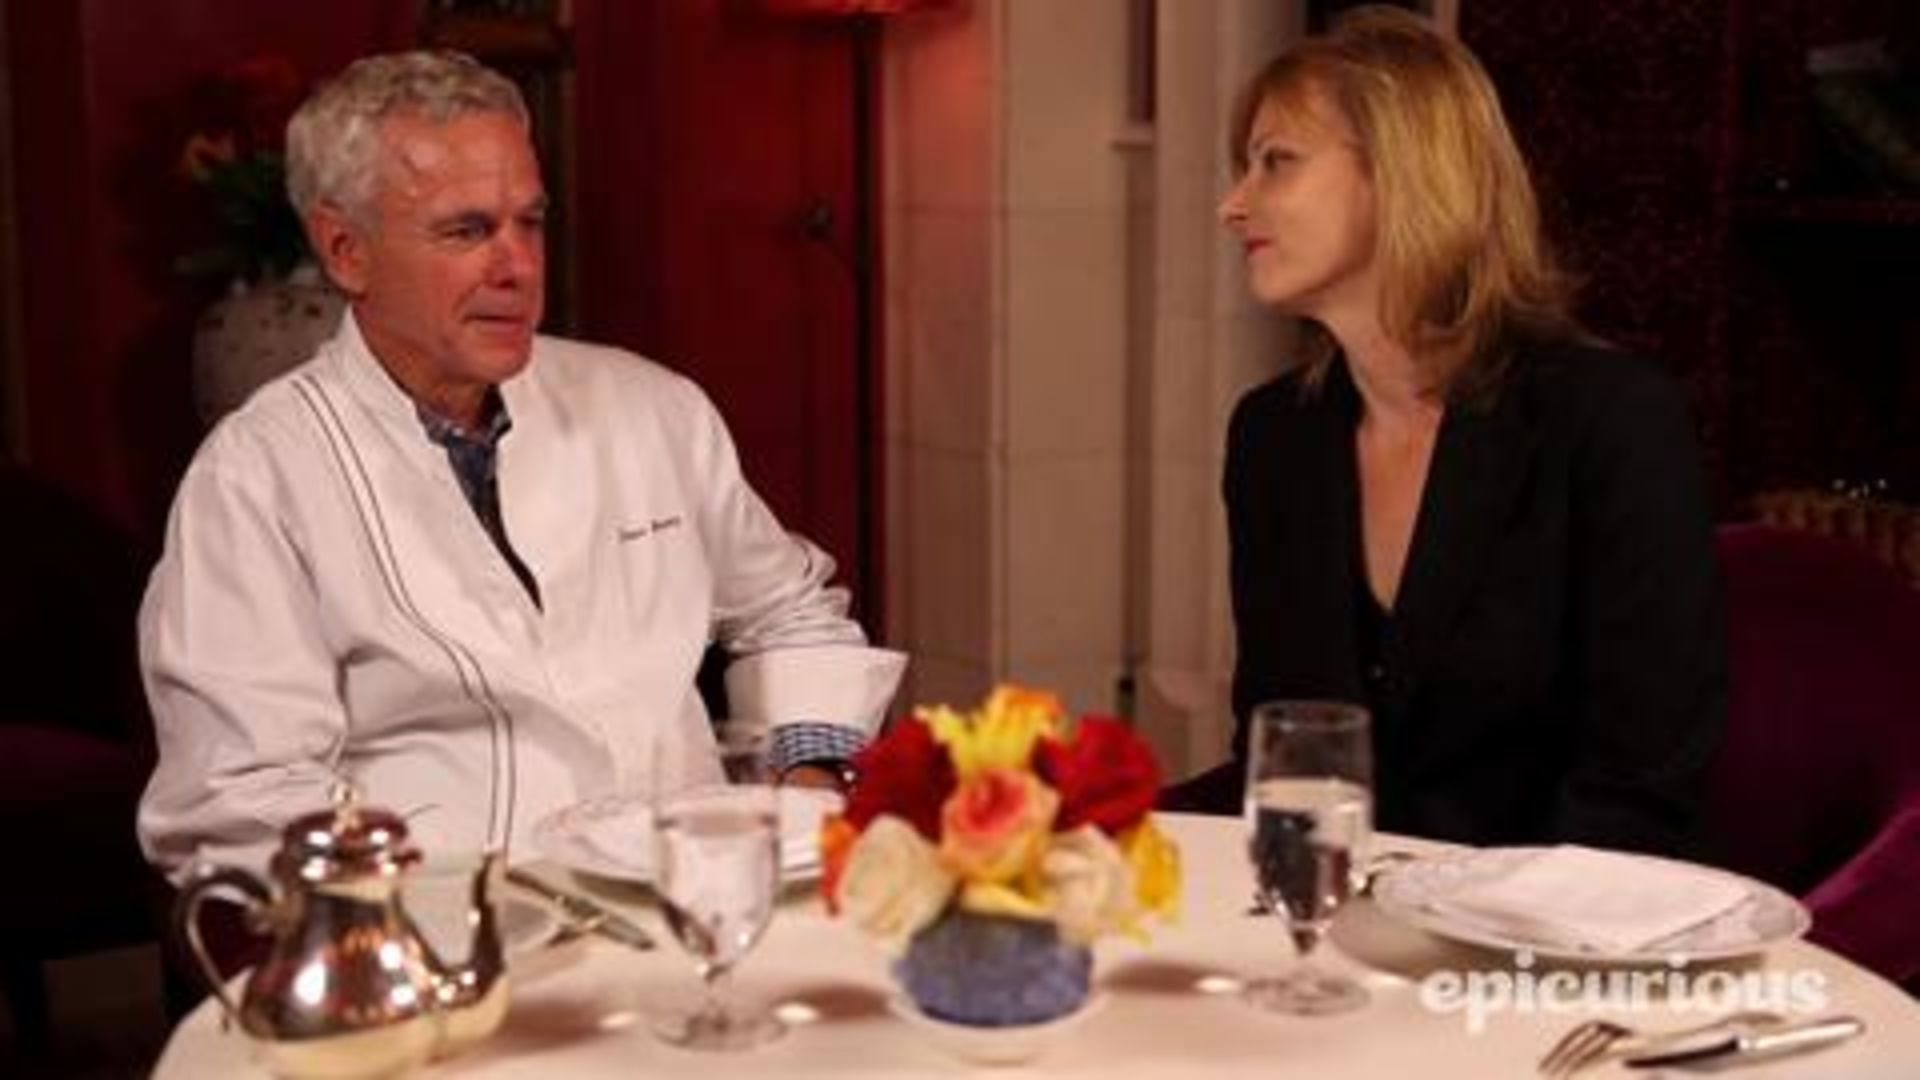 David Bouley on Becoming a Chef